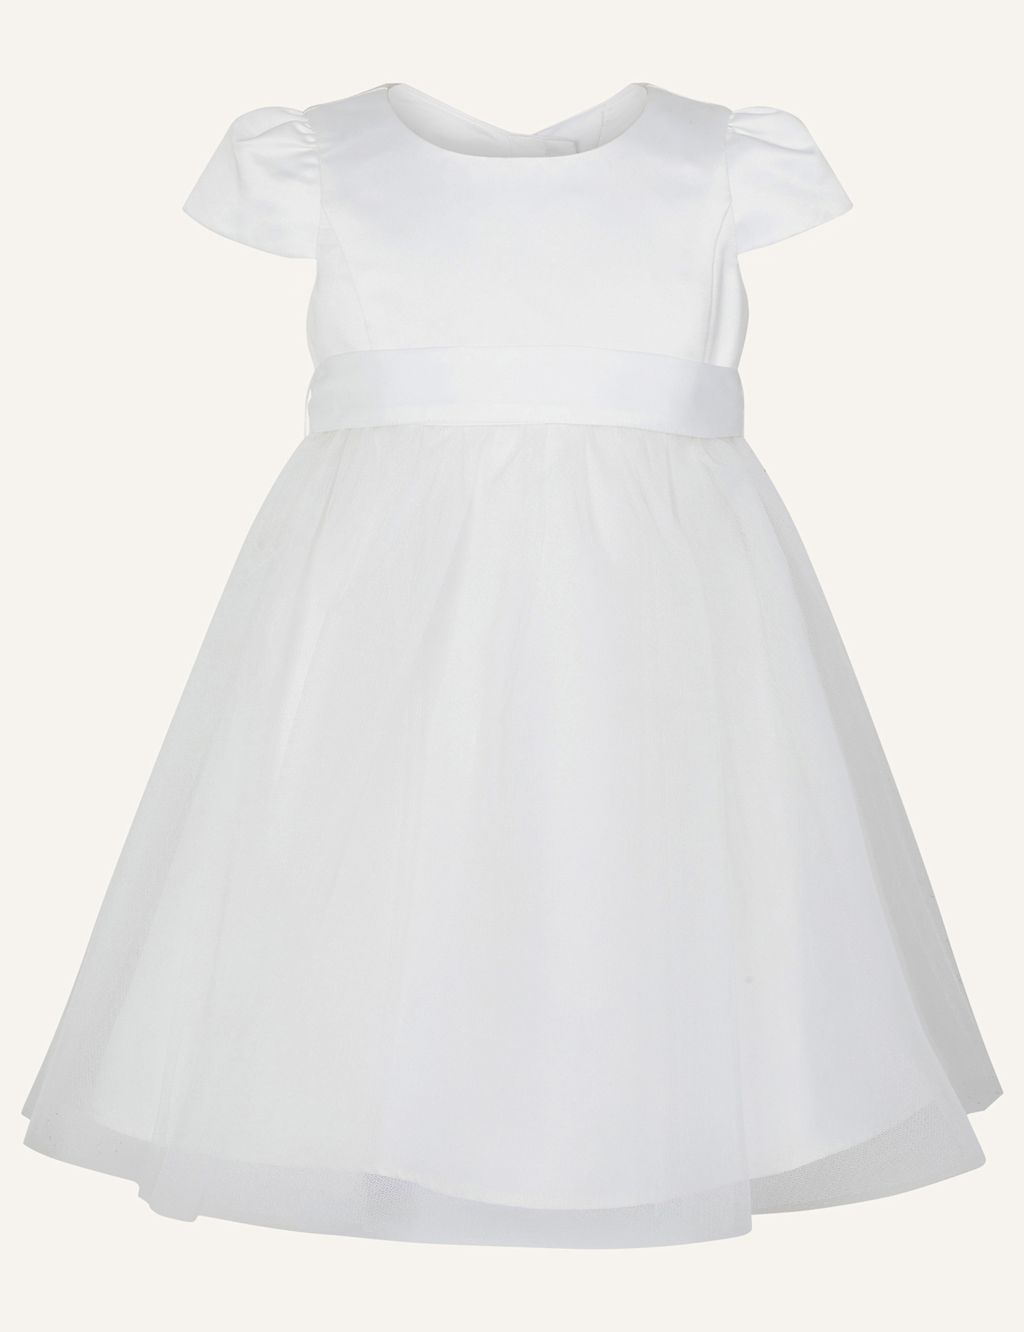 Tulle Occasion Dress (0-3 Yrs) image 1